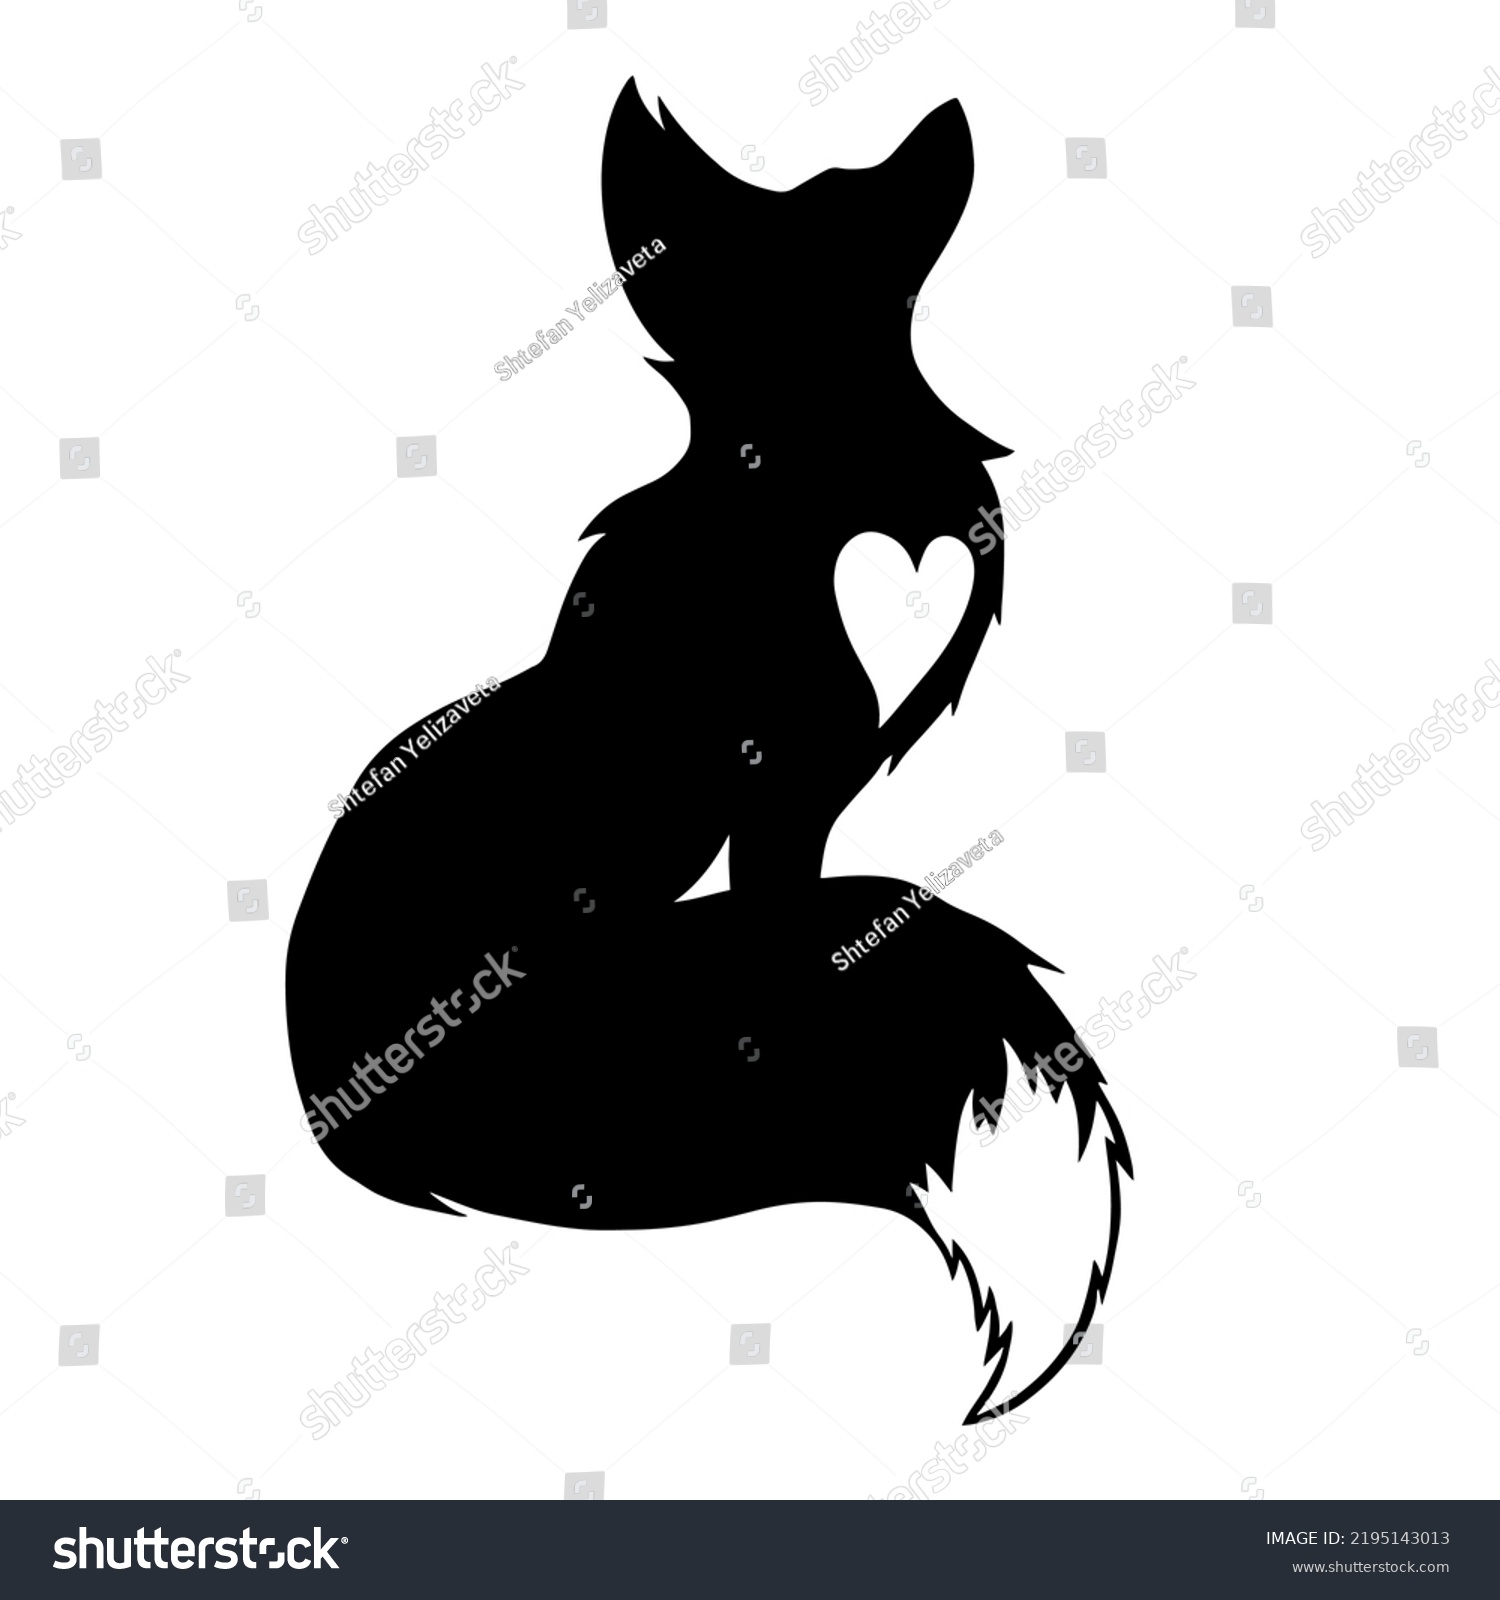 SVG of Fox logo with heart. Elegant Stand fox logo art with graceful tail. Design of black fox silhouette animal mascot logo template vector illustration clipart. Vector isolated black and white fox icon.  svg